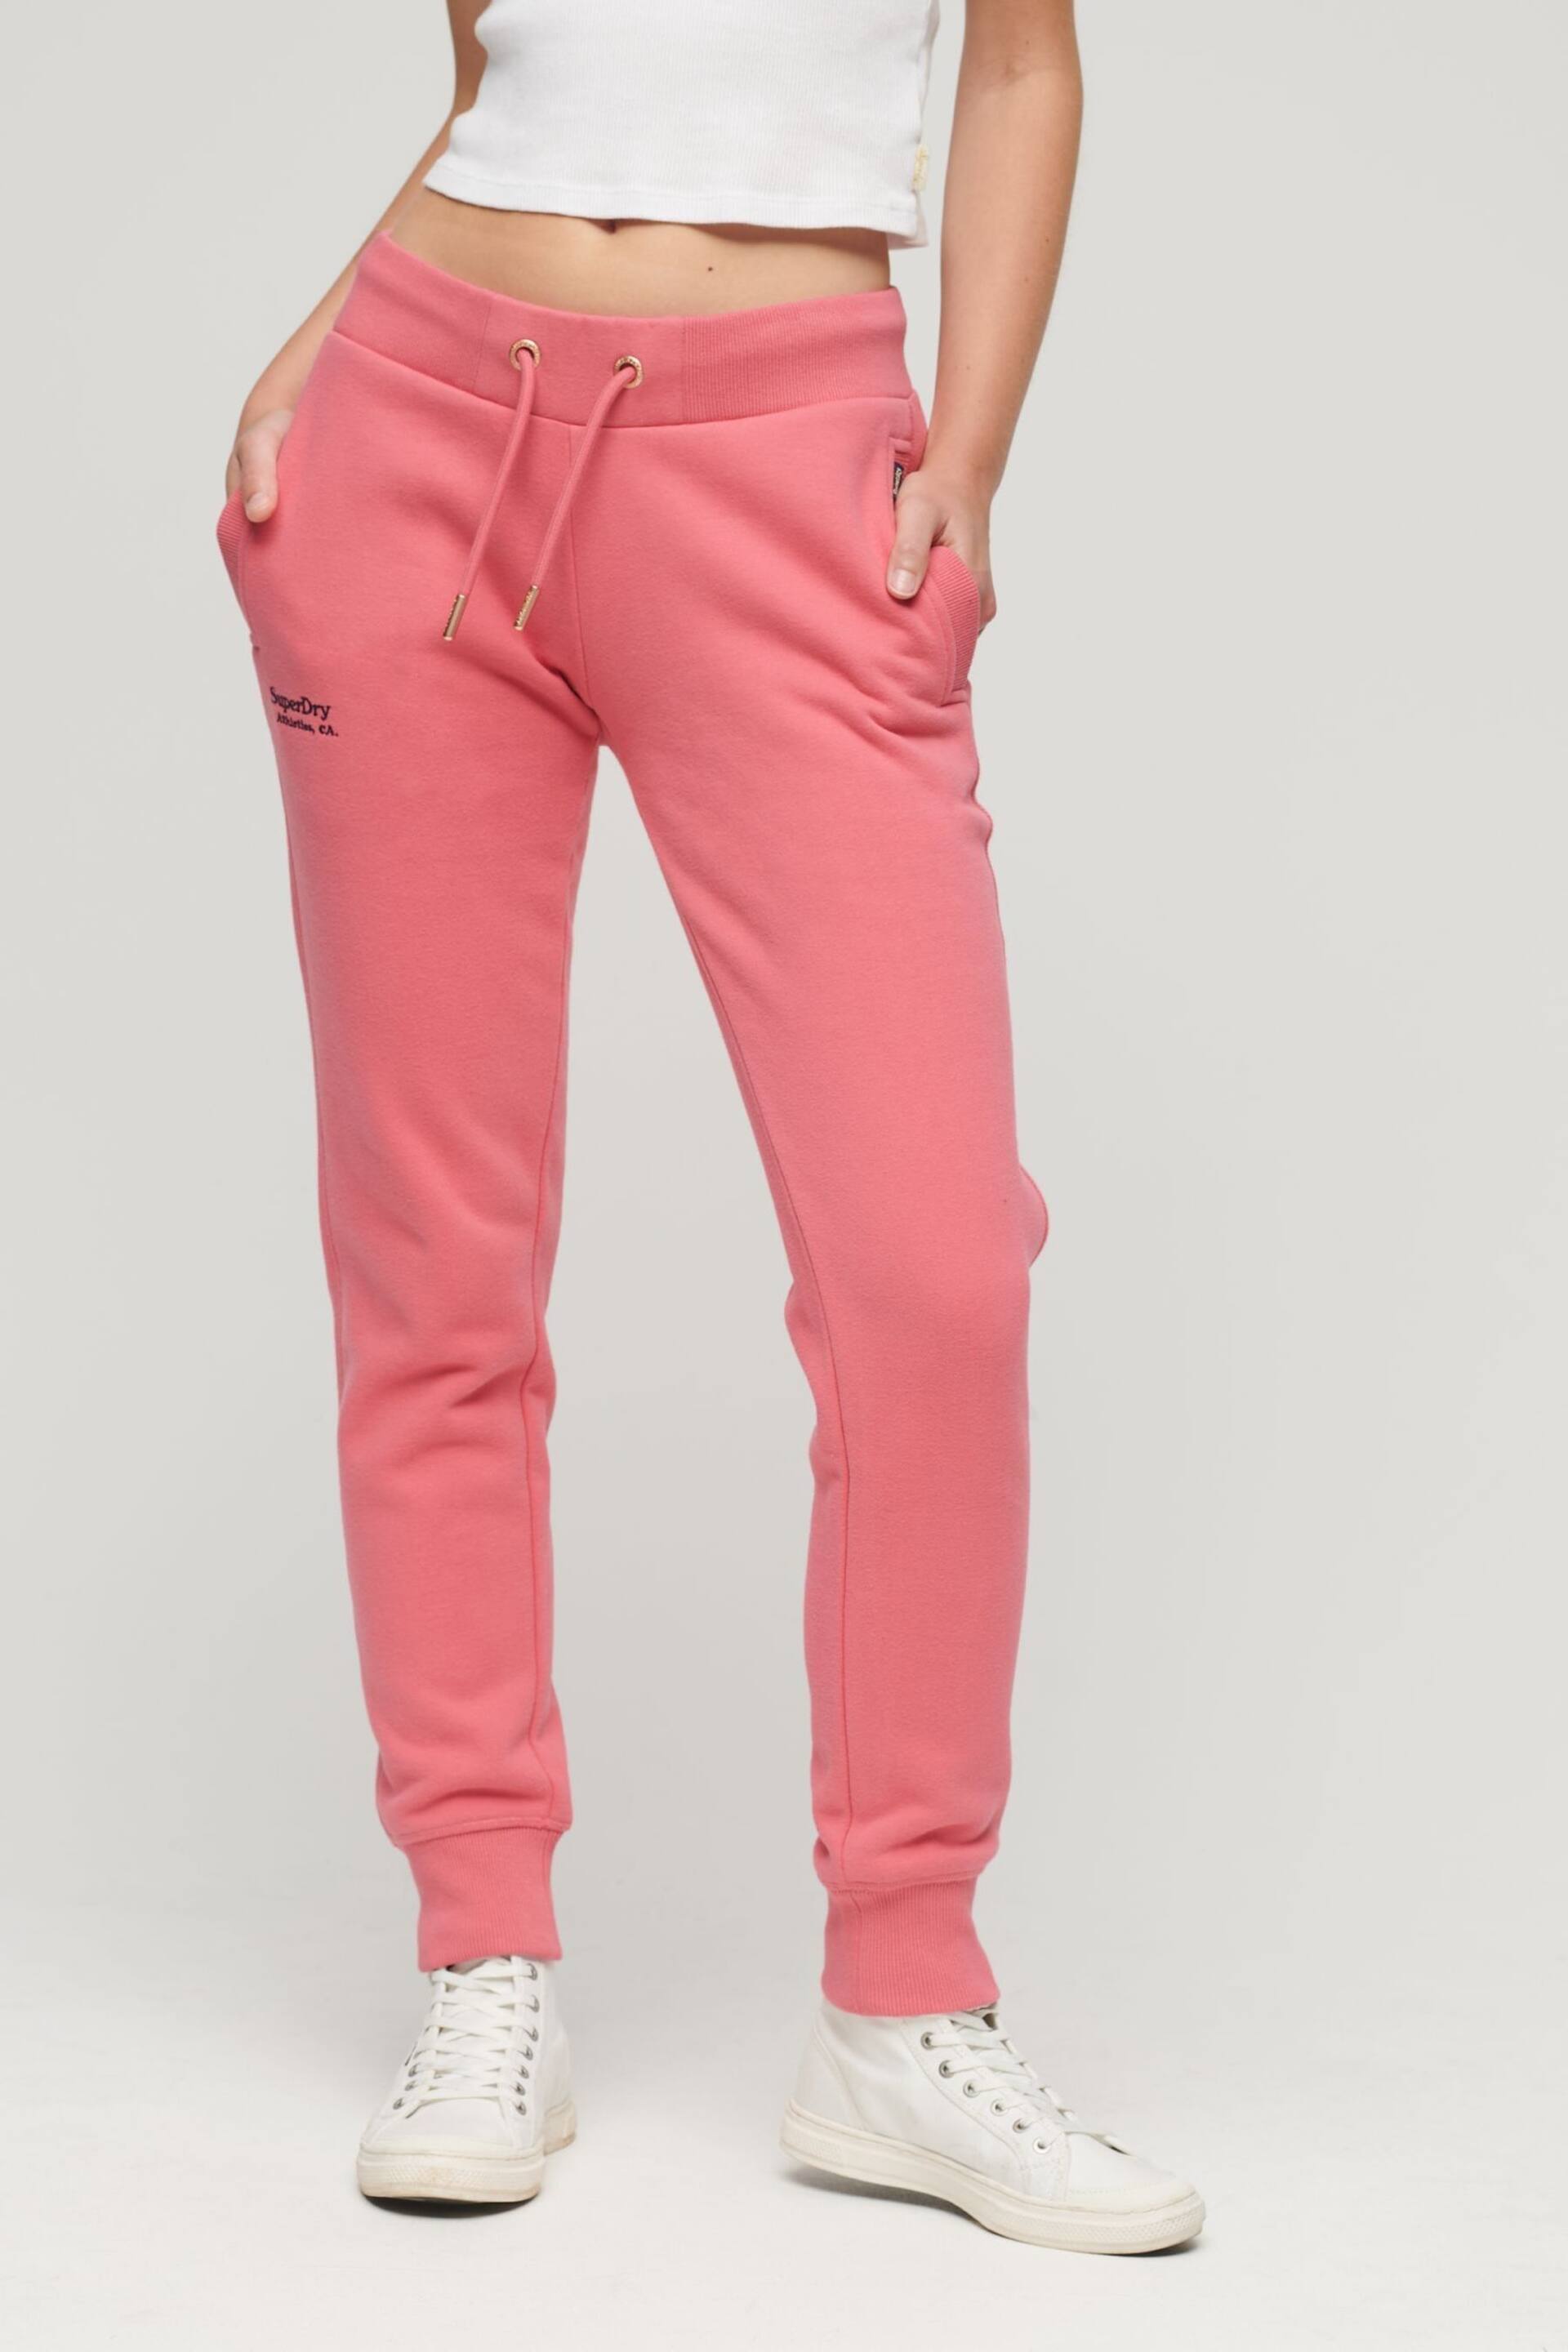 Superdry off pink Essential Logo Joggers - Image 1 of 6